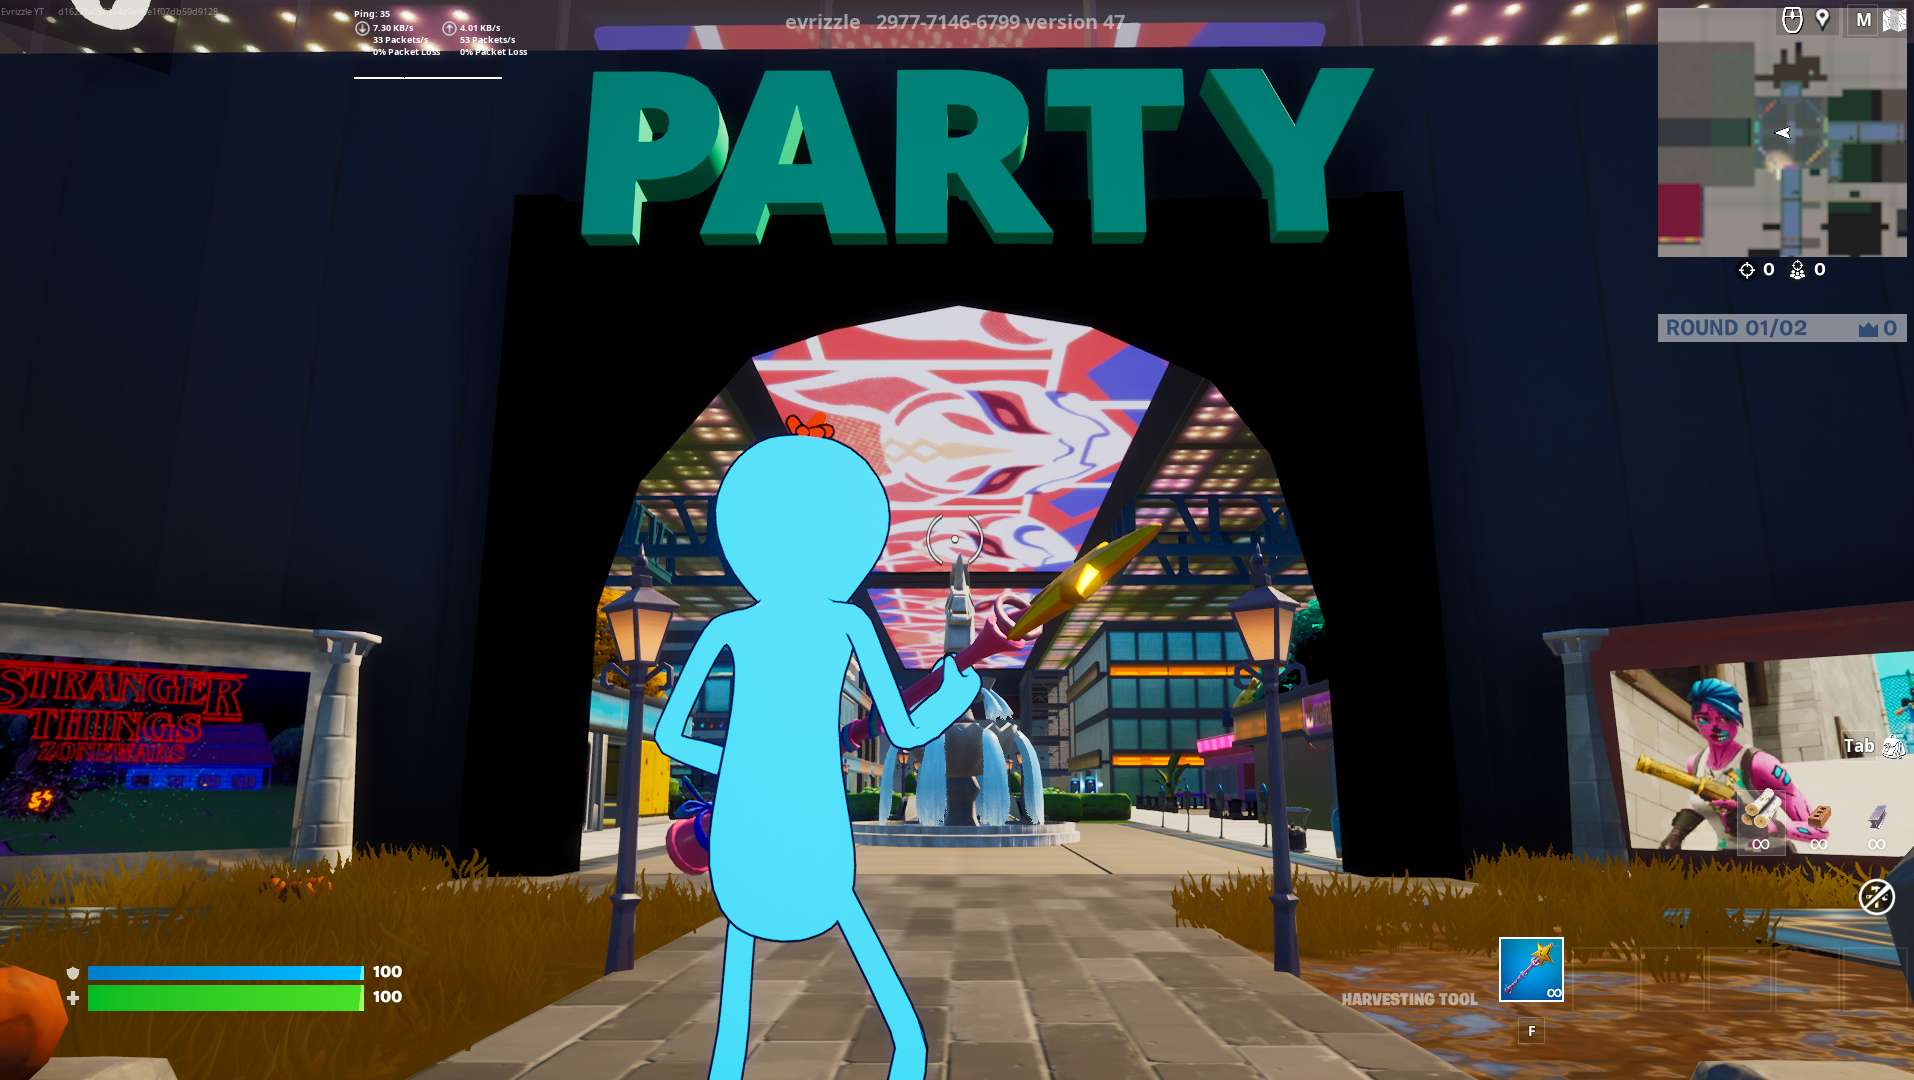 Evrizzle's Party HUB image 2